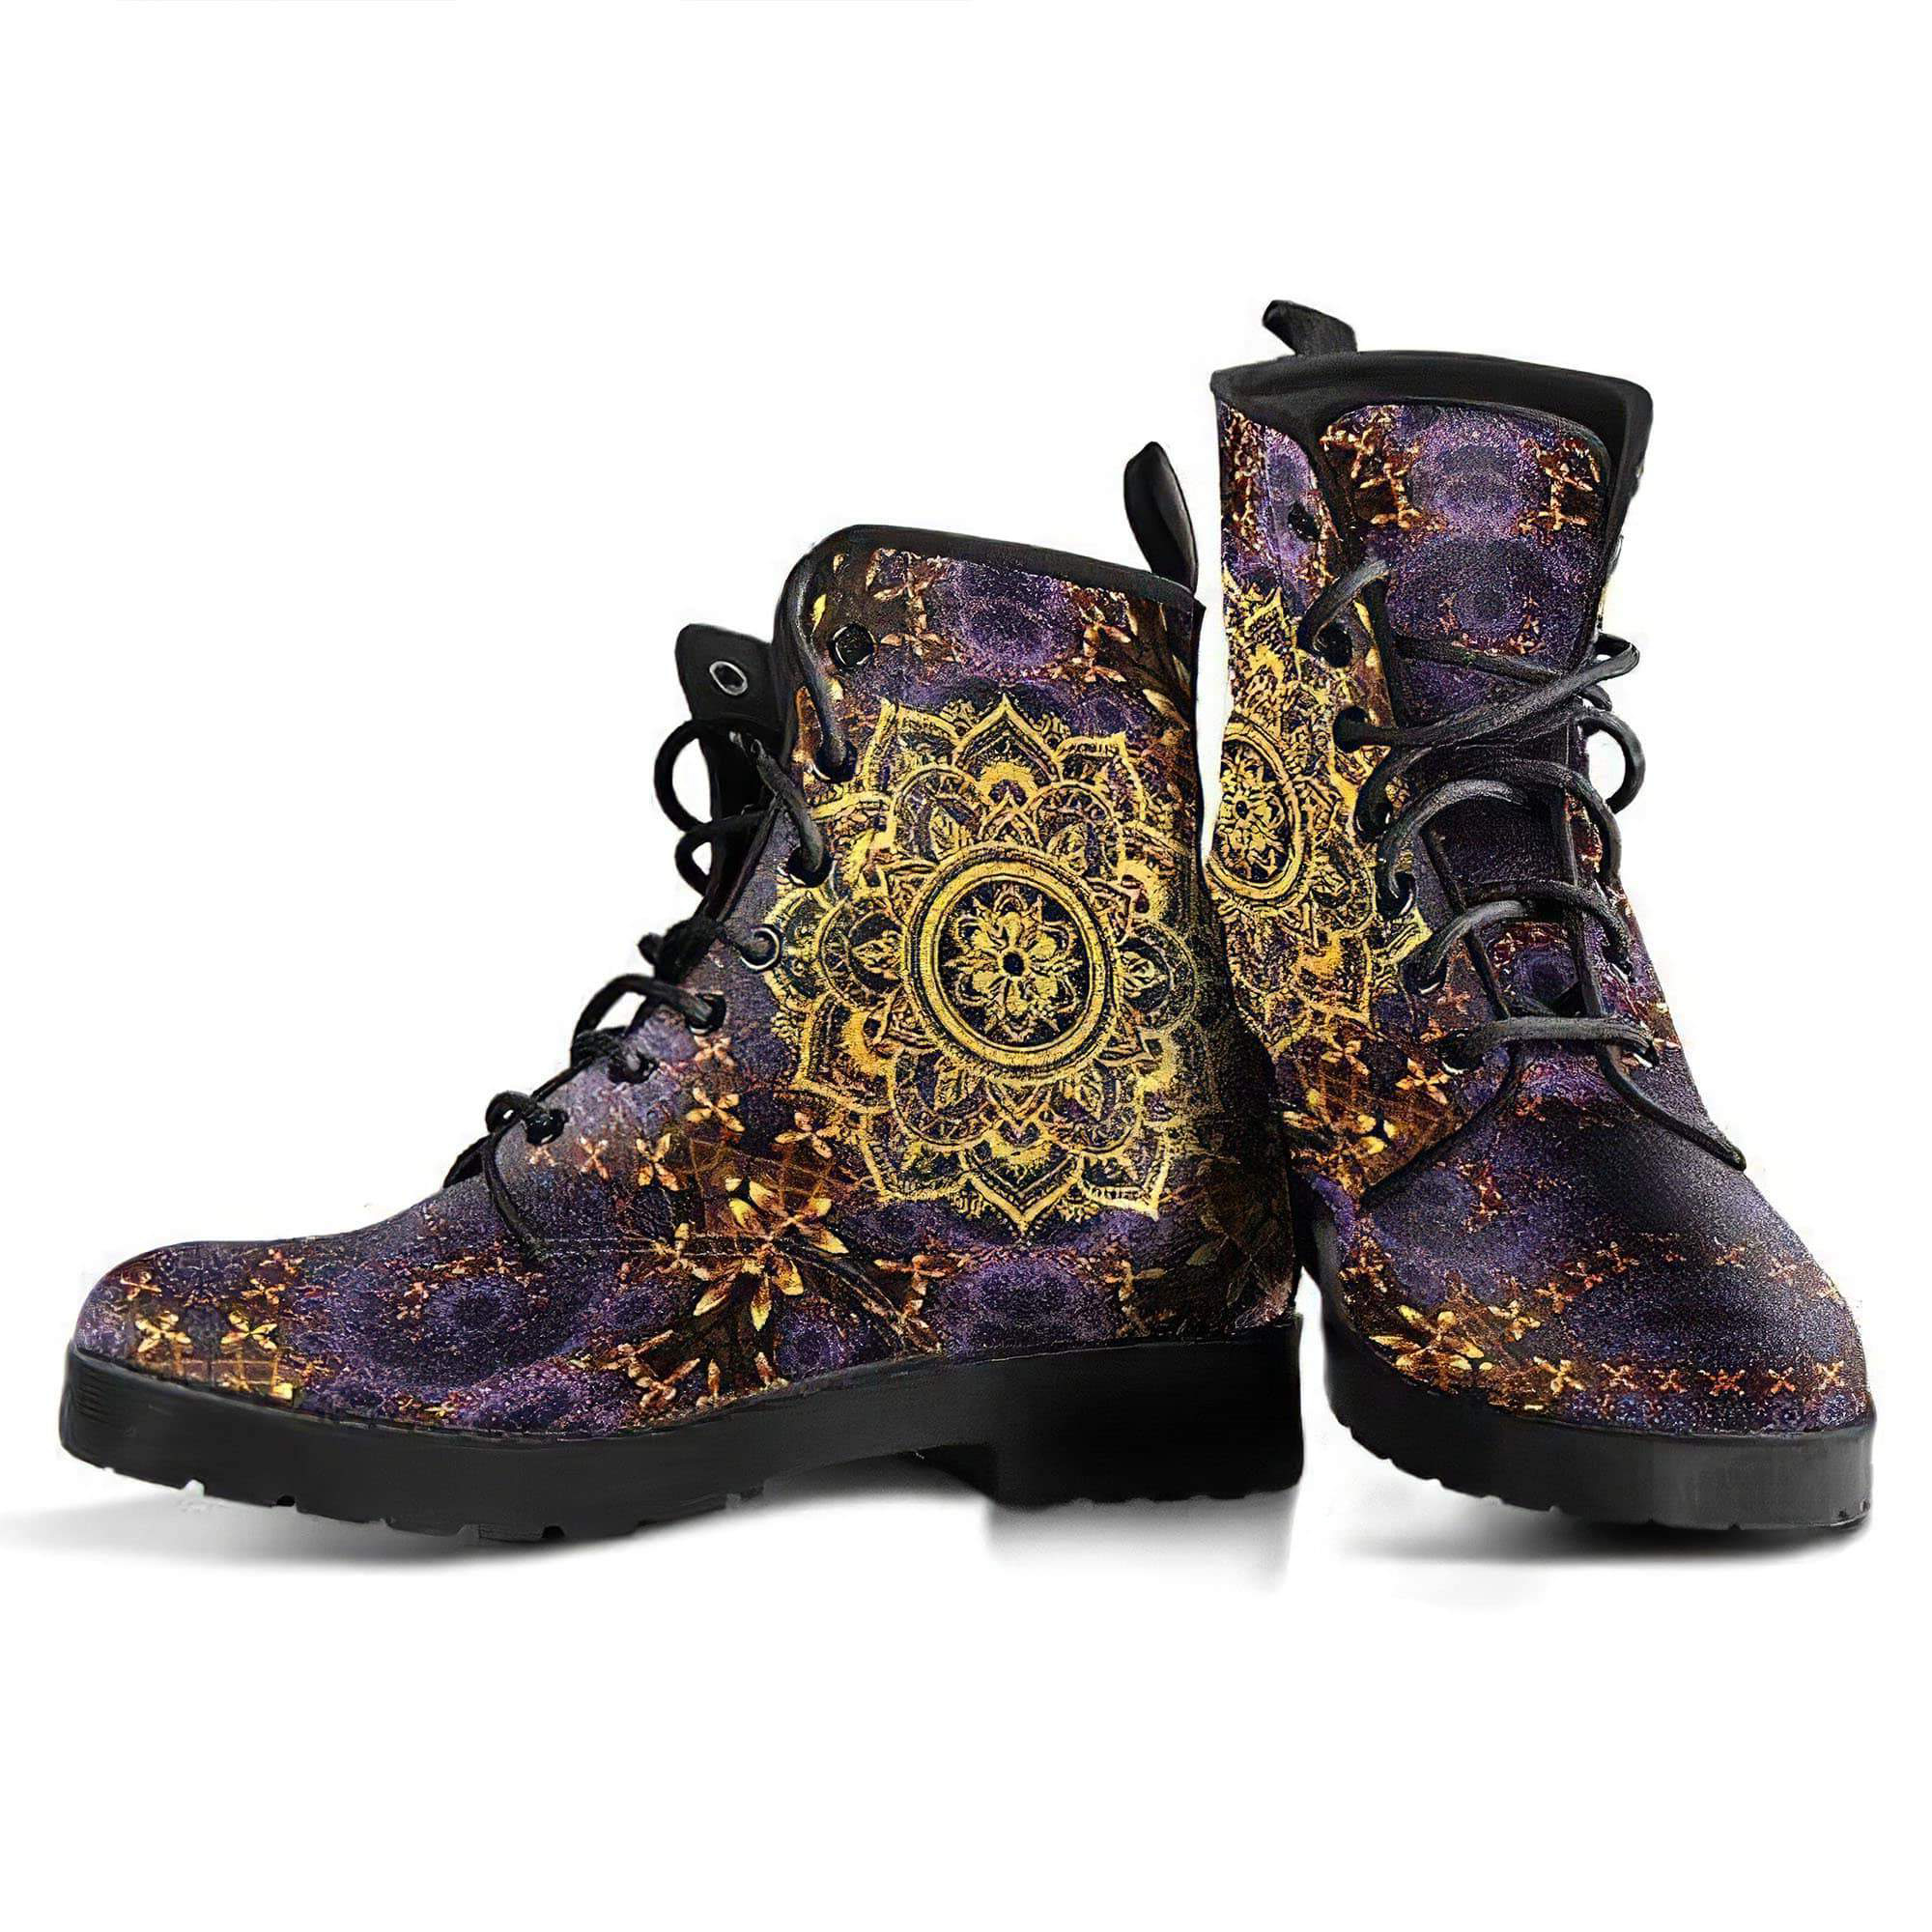 purple-gold-mandala-handcrafted-boots-women-s-leather-boots-12051936182333.jpg